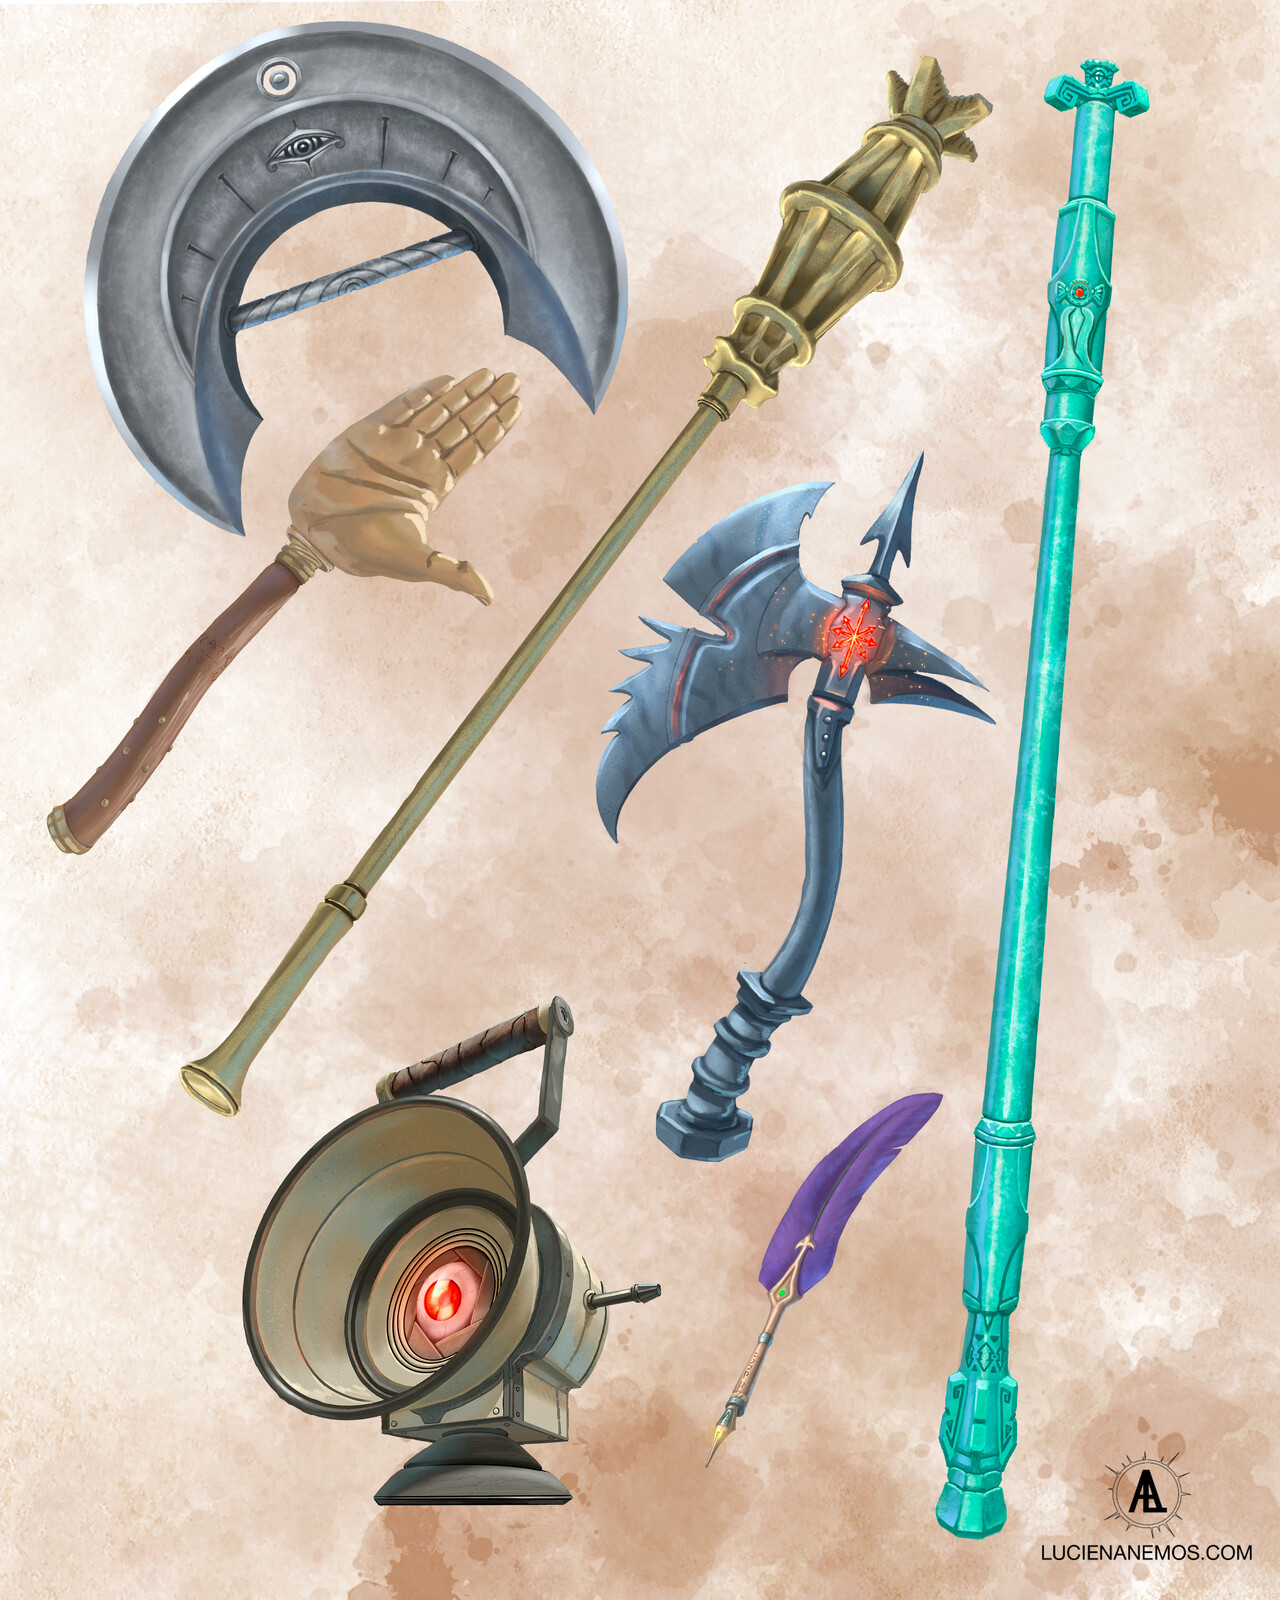 Warden Crescent, Hand of Netheril, Scepter of Stonewell, Chaos King Axe, Kadar Staff, Andrais Quill and Lamp of the Evil Eye